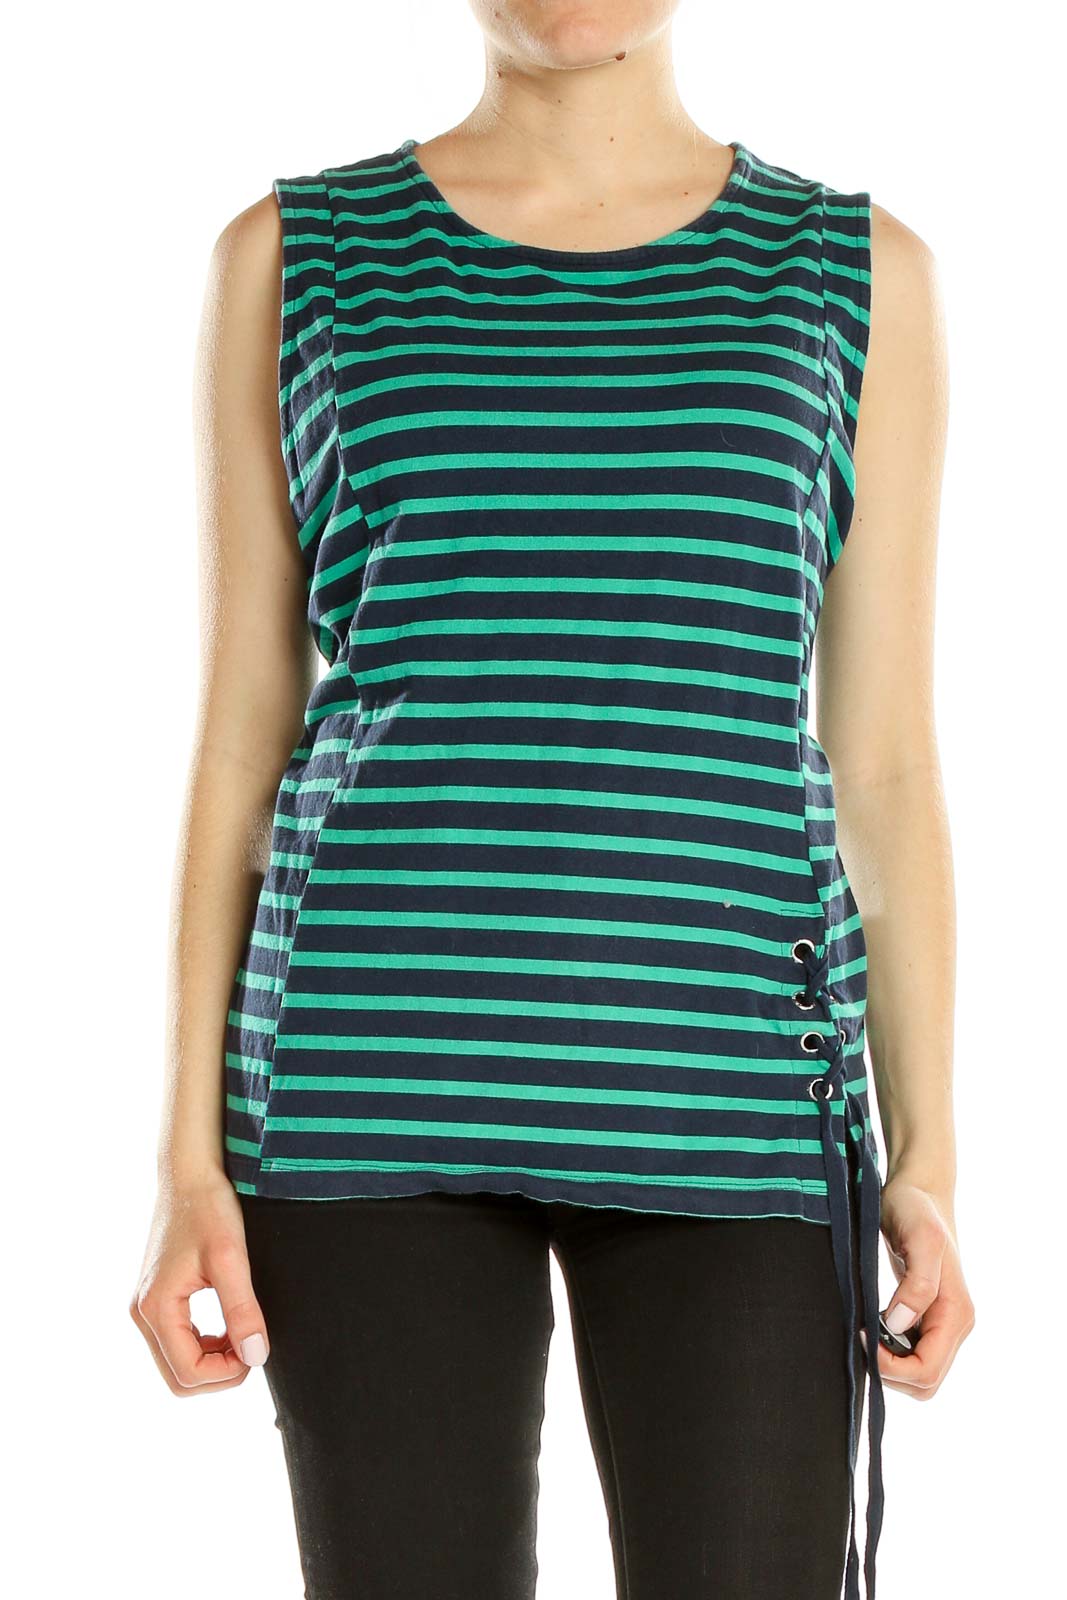 Blue Green Striped Casual Top Front